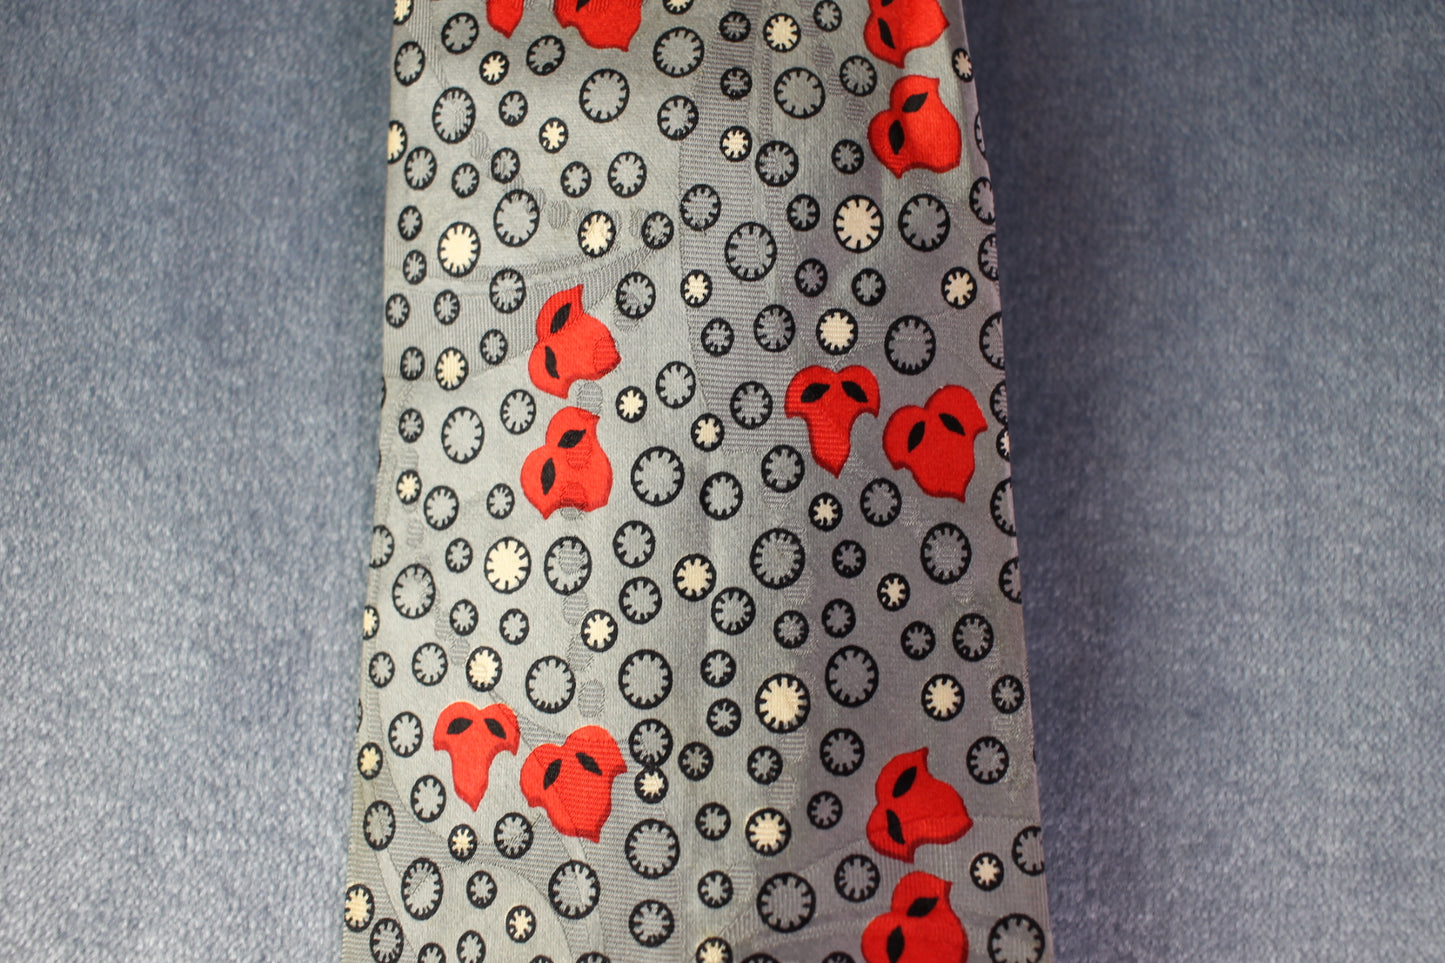 Vintage Titche Goettinger Co silver red white circles pattern tie